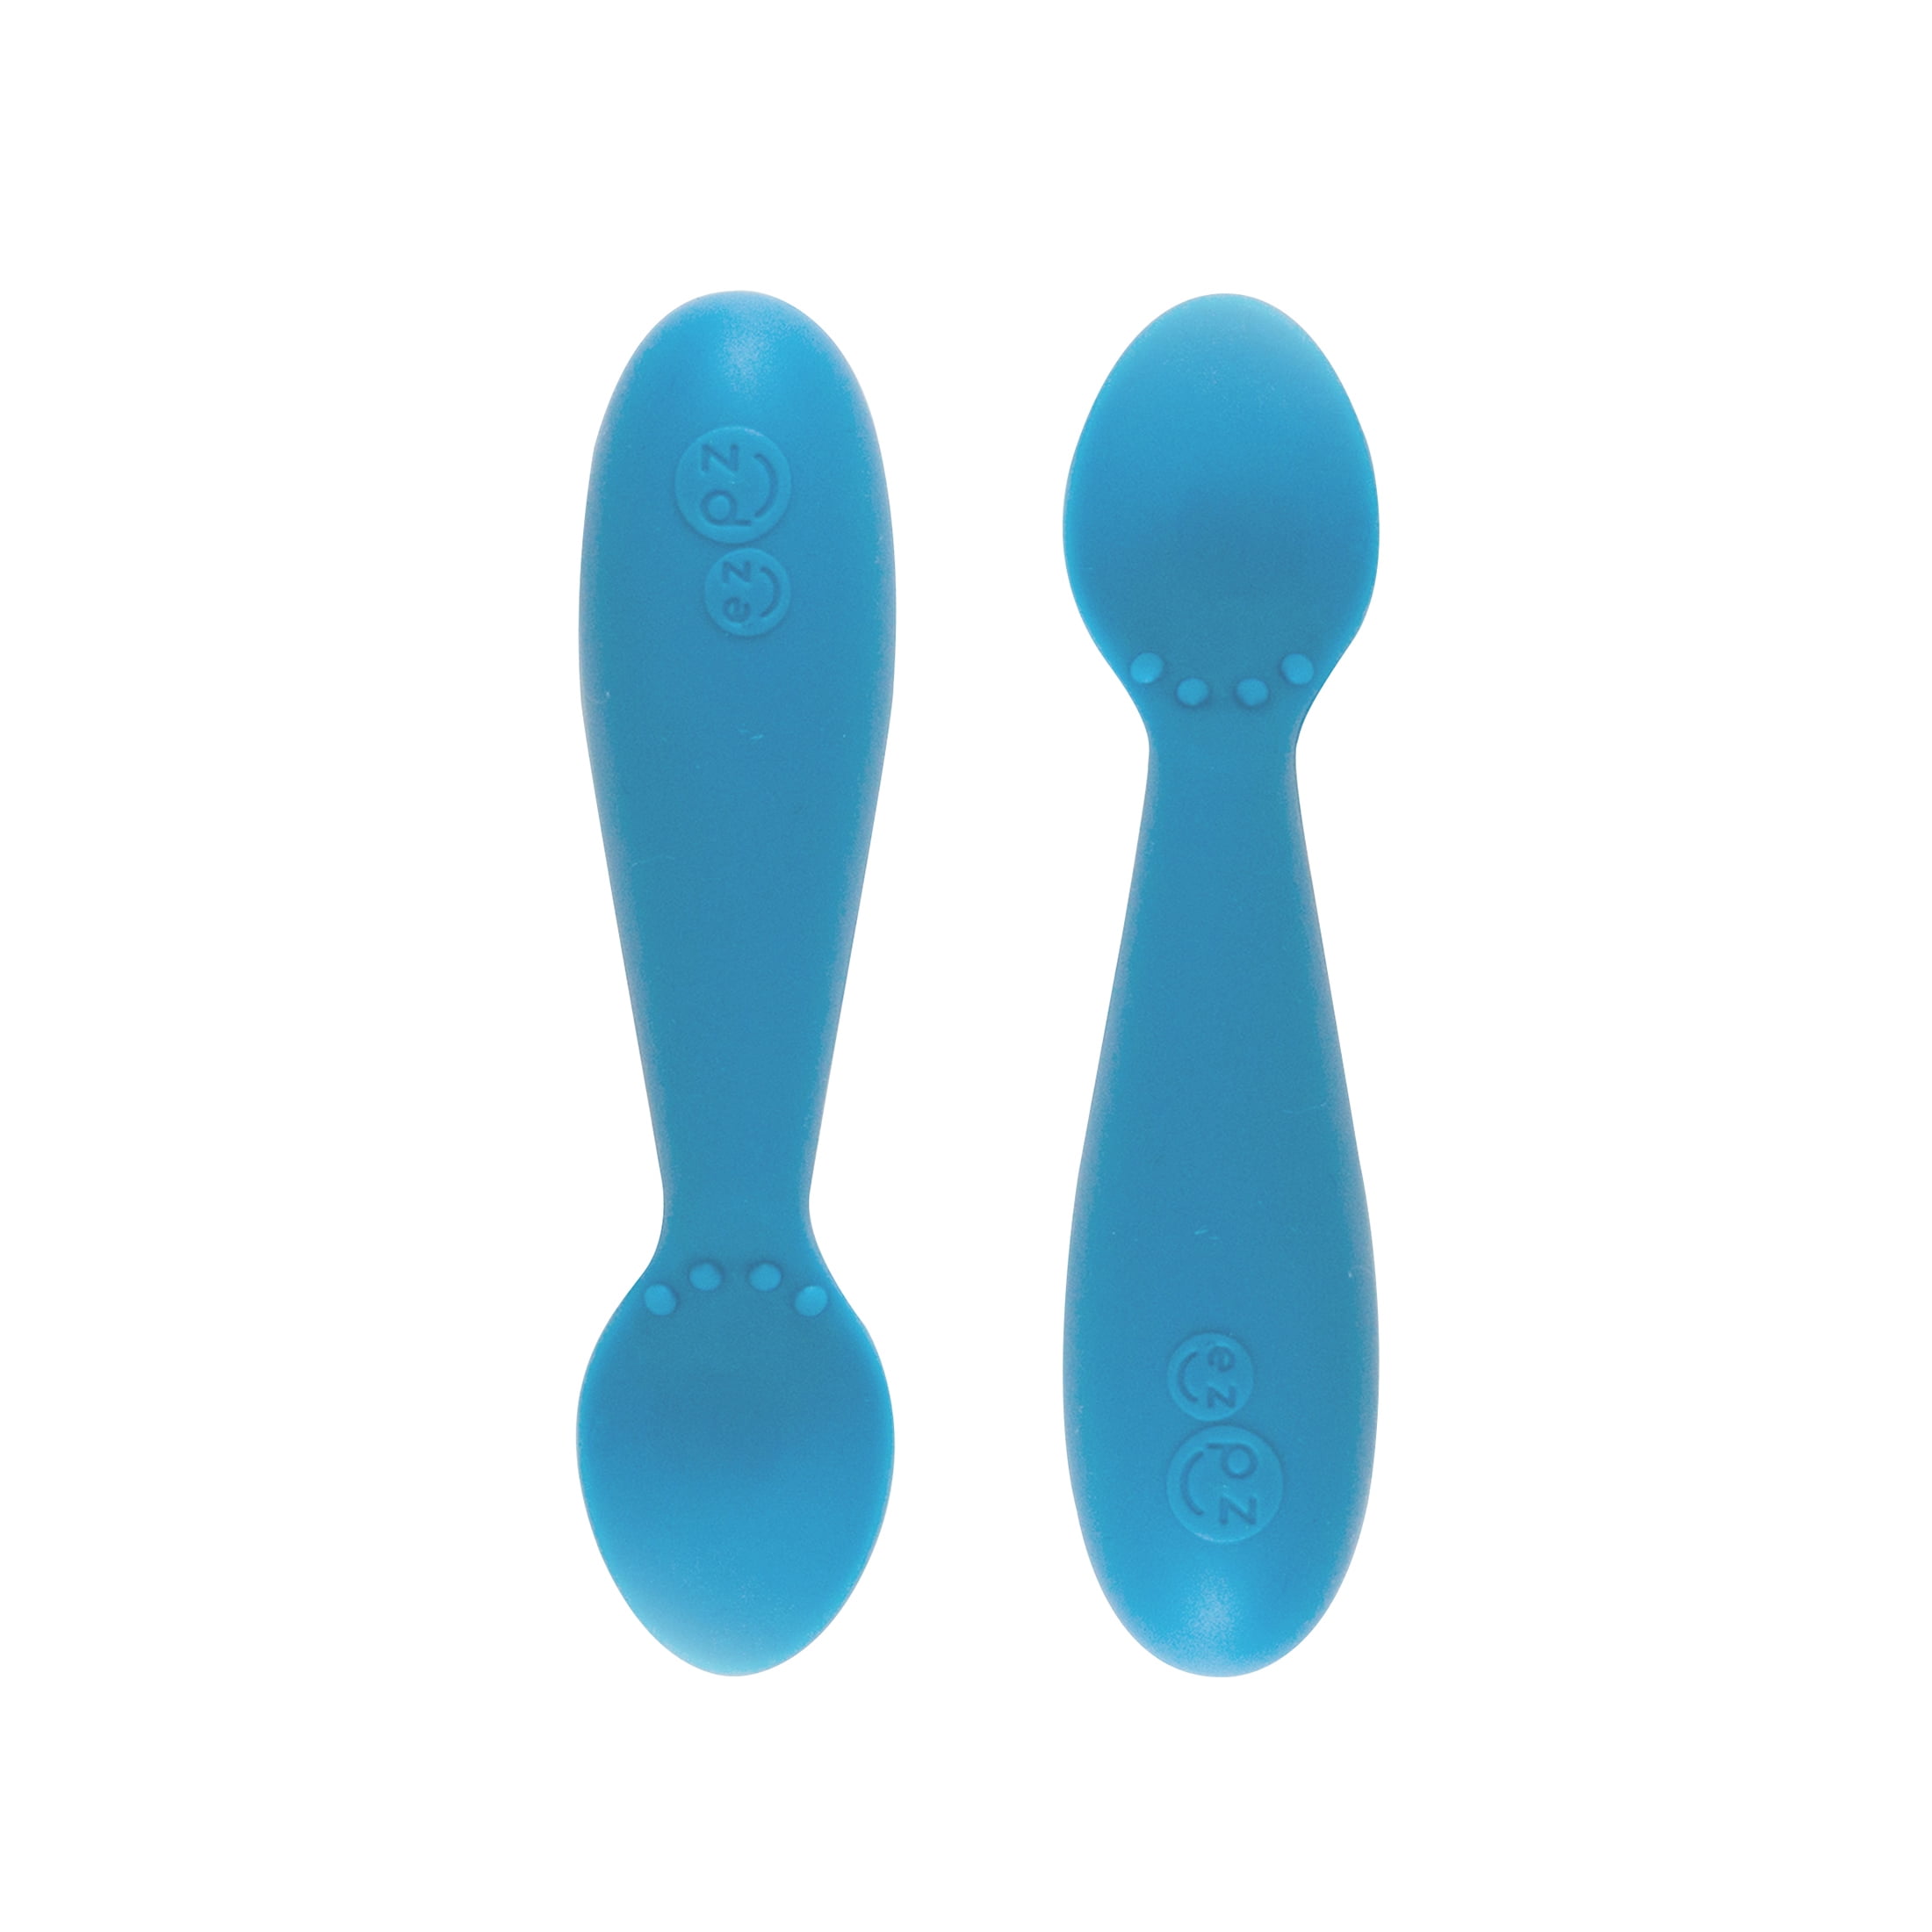 ezpz Tiny Spoon (2 Pack in Coral) - 100% Silicone Spoons for Baby Led  Weaning + Purees - Designed by a Pediatric Feeding Specialist - 6 Months+